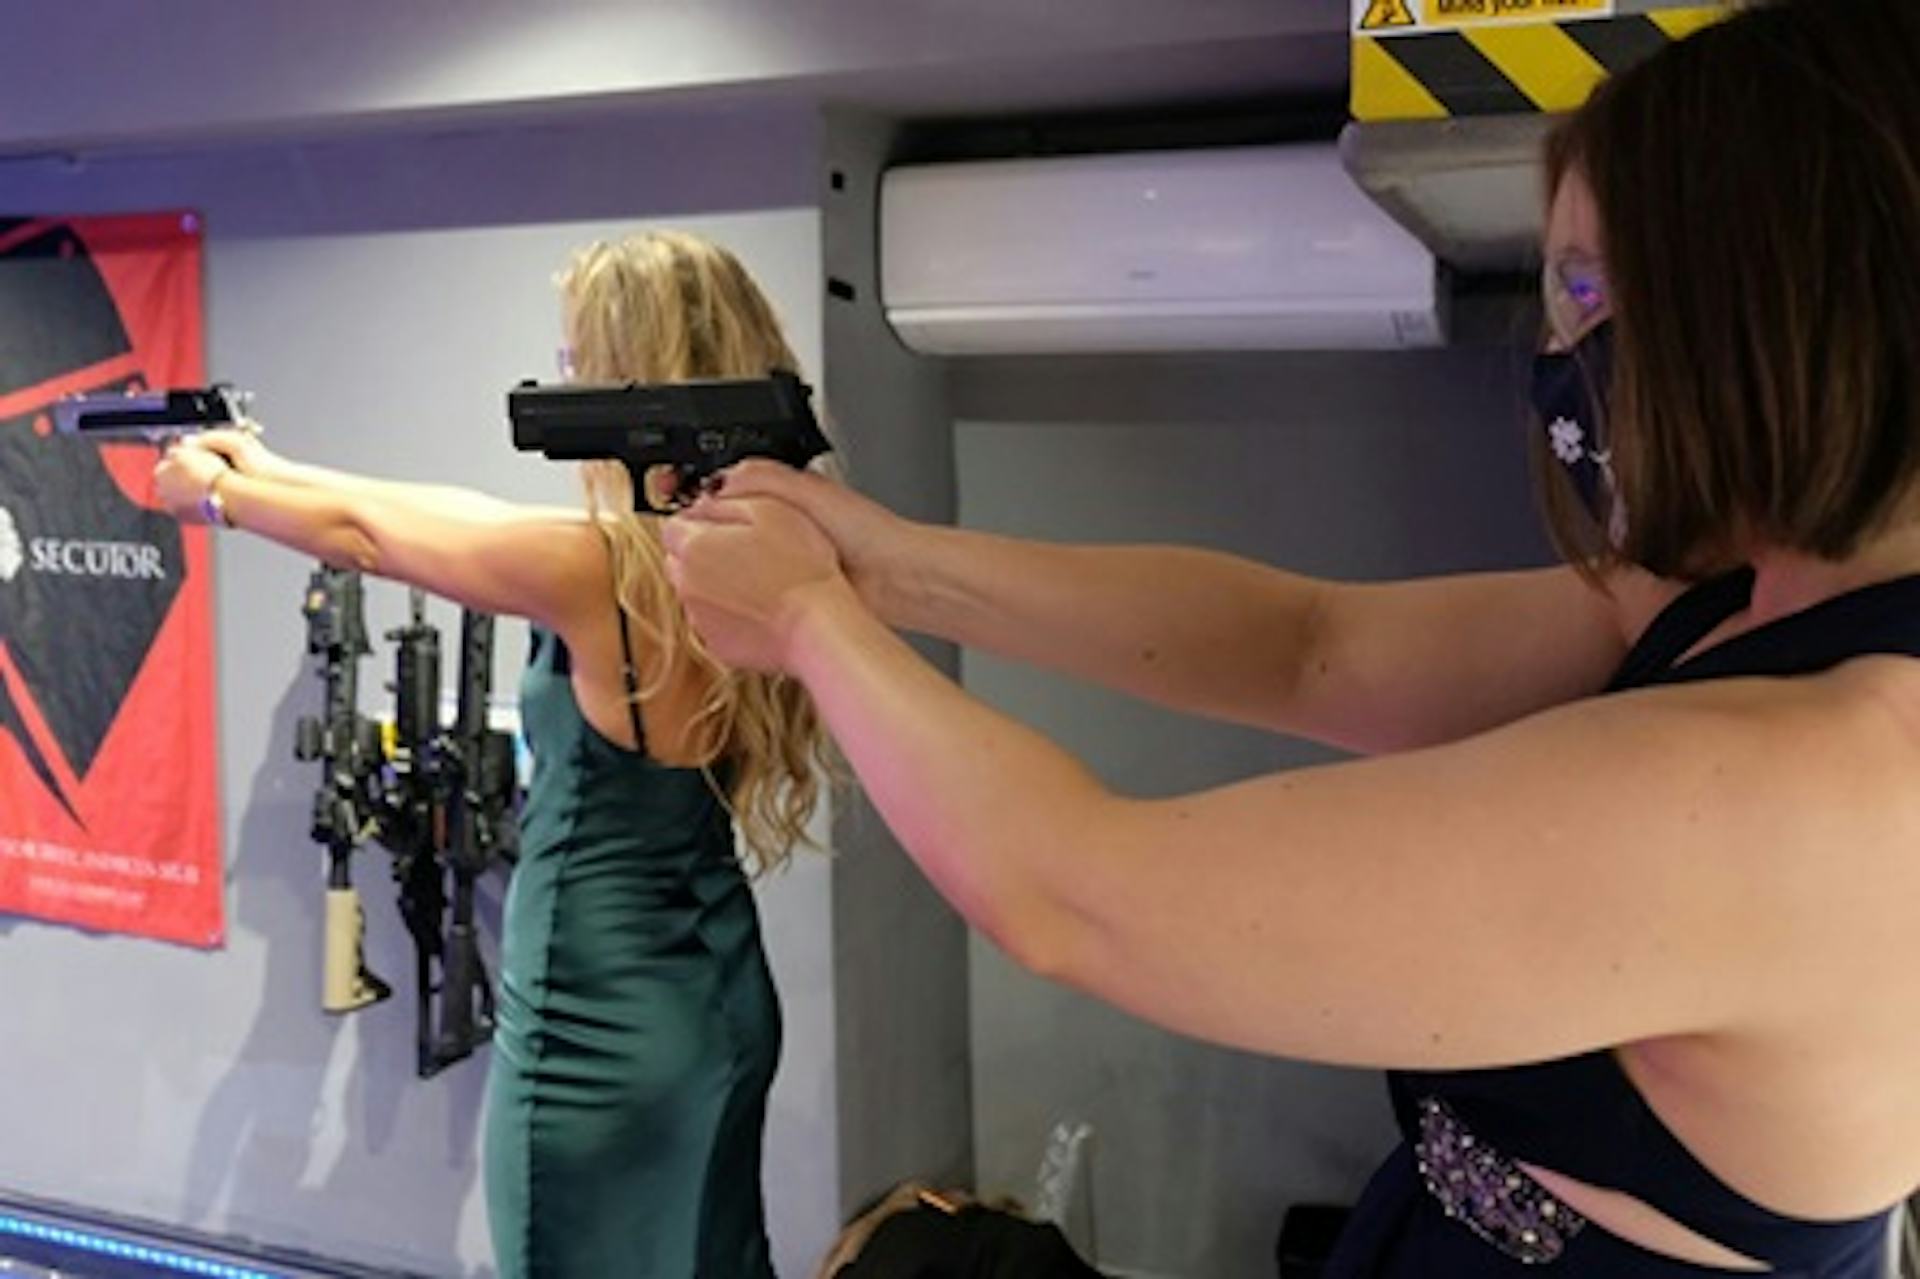 James Bond Themed Immersive Experience: A Day in the Life